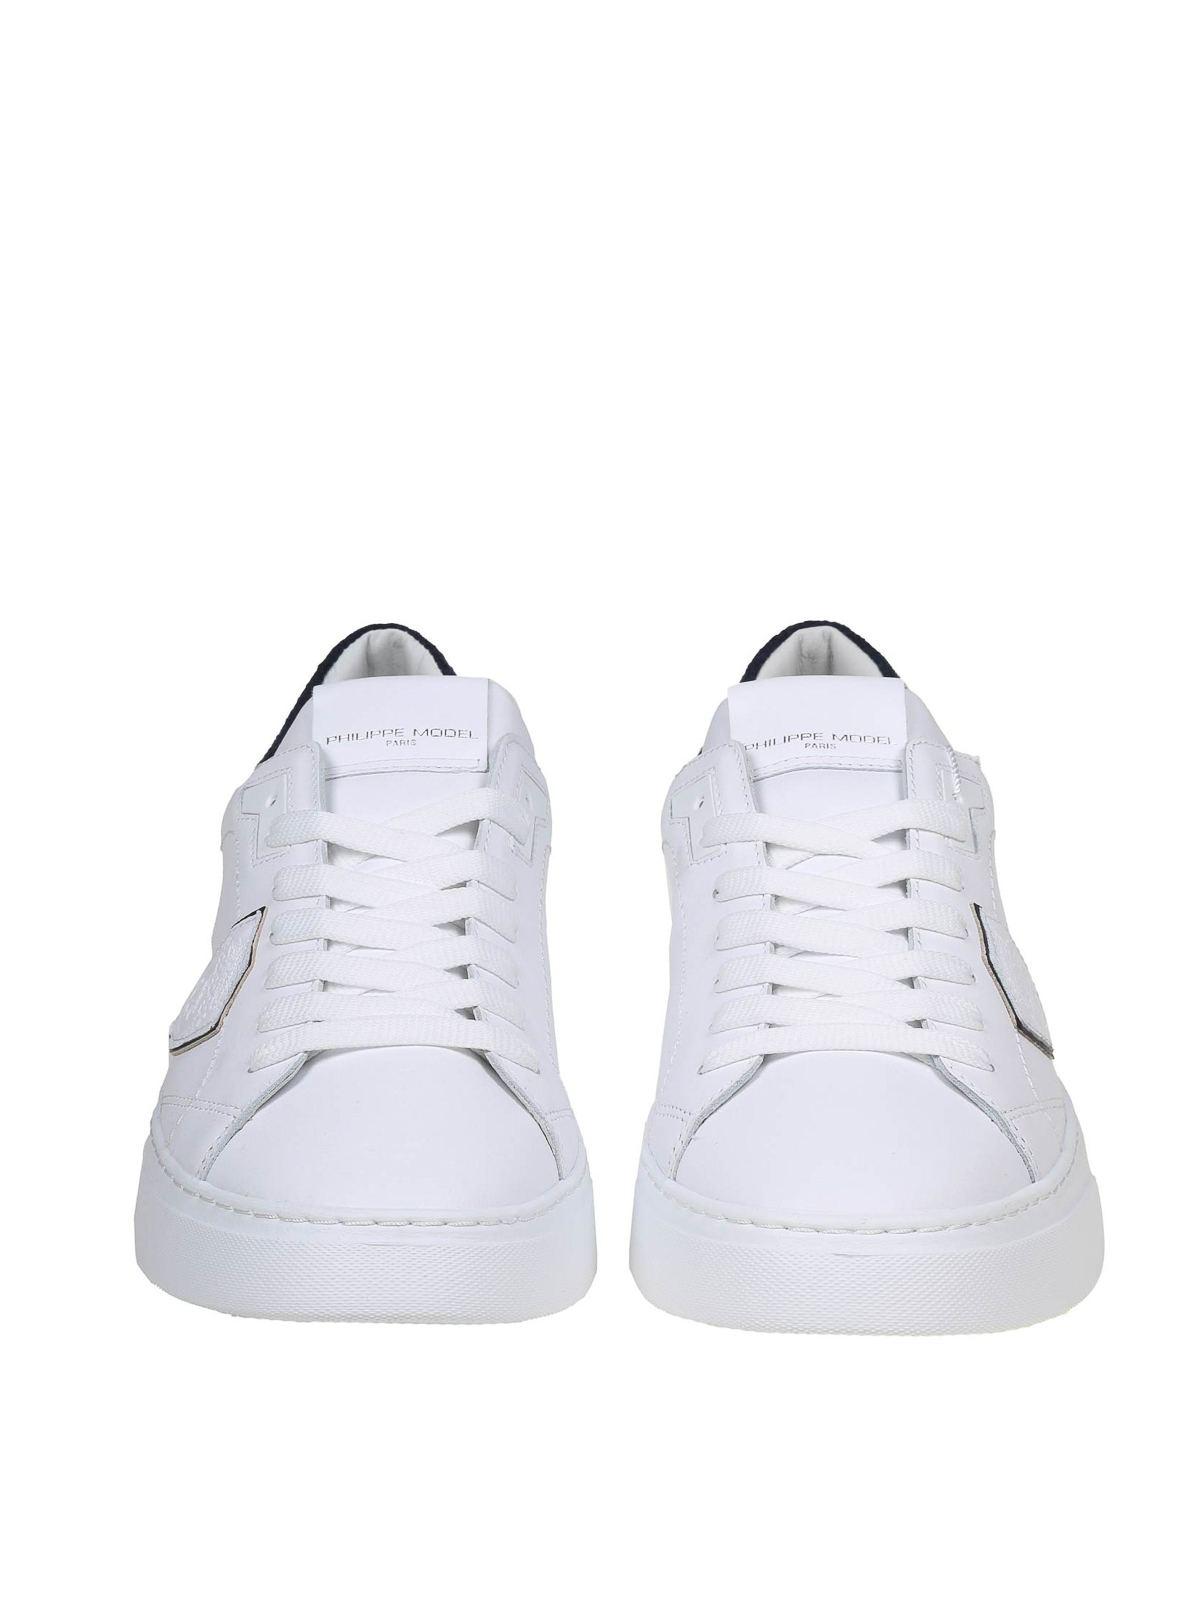 Shop Philippe Model Temple Low Sneakers In White And Blue Leather